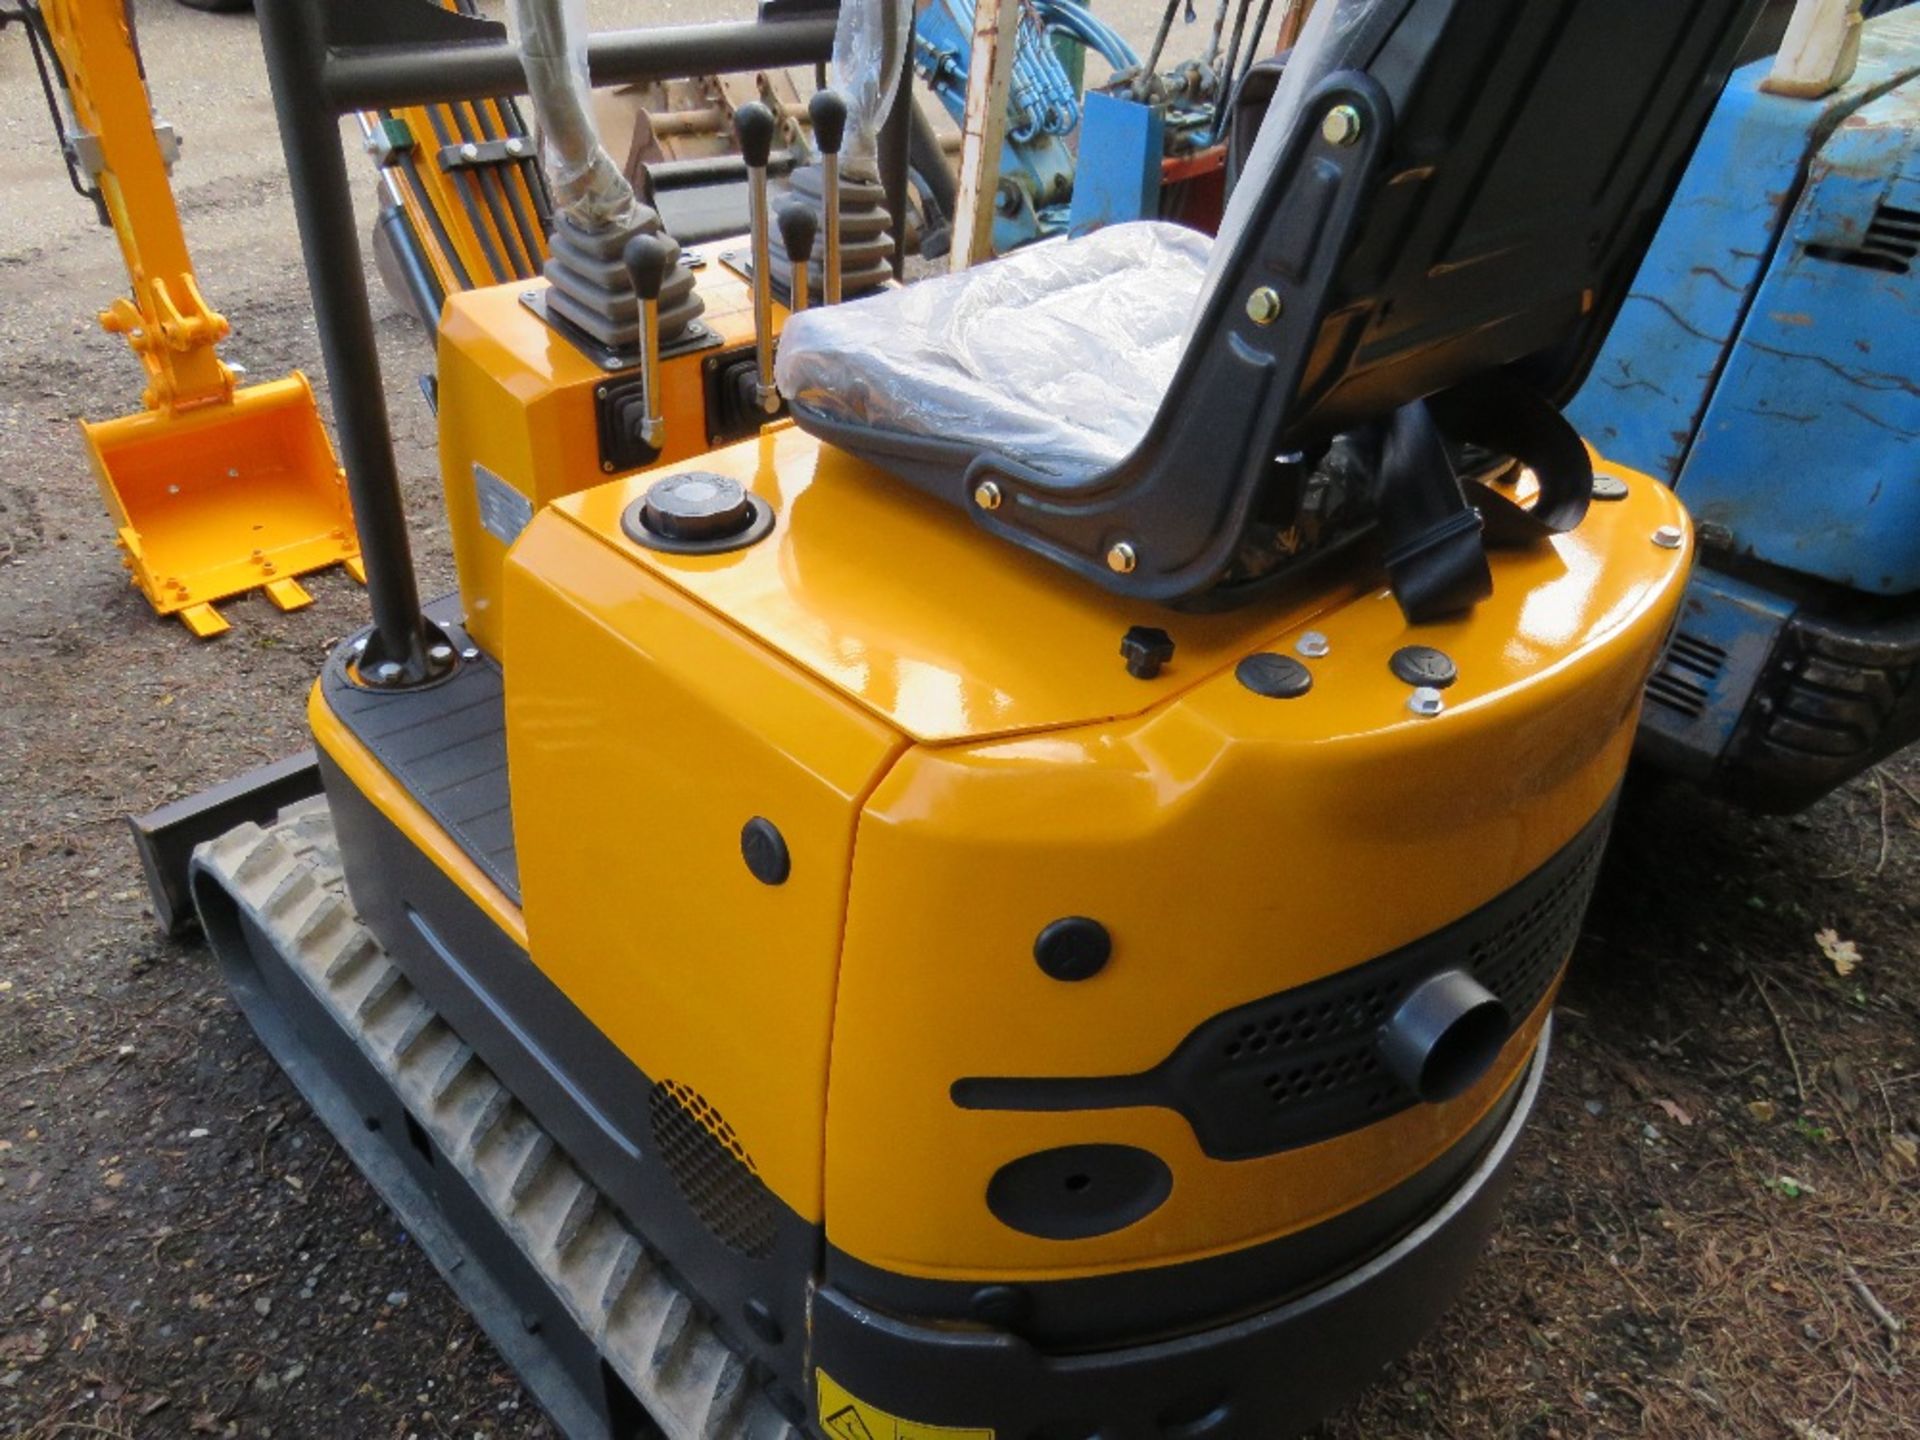 KME10 MINI EXCAVATOR / DIGGER YEAR 2020, UNUSED. SN:20C060688. WHEN TESTED WAS SEEN TO DRIVE, SLEW A - Image 5 of 6